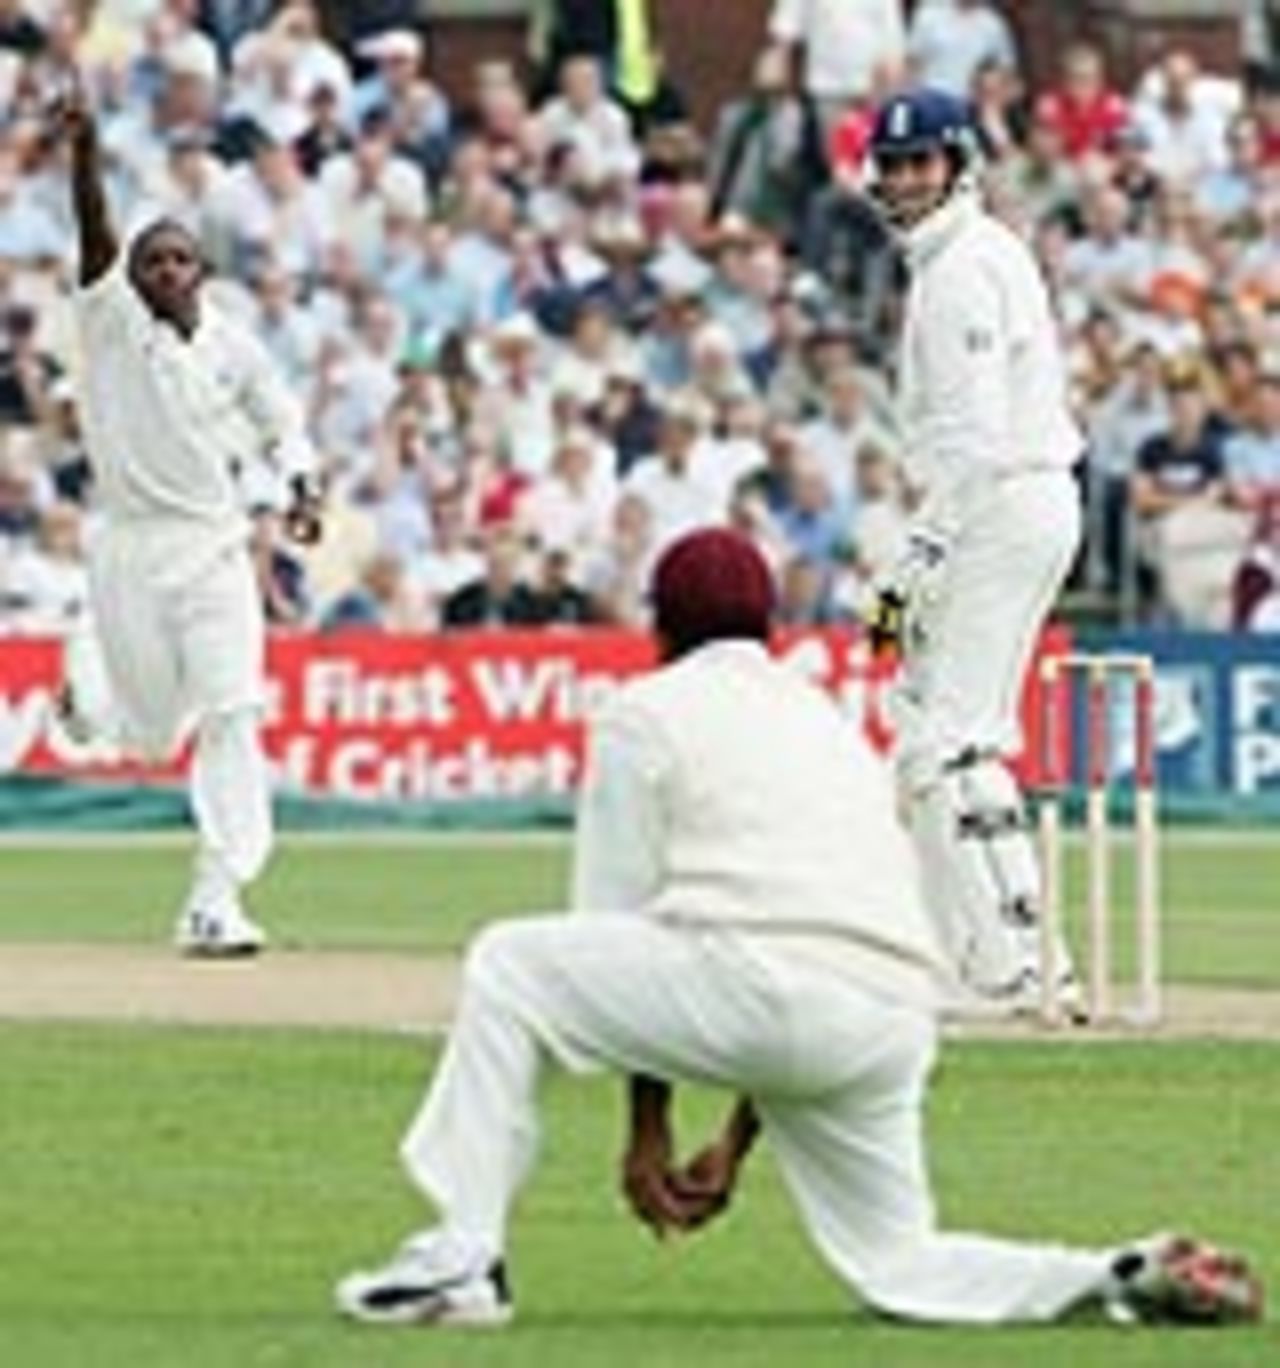 Marcus Trescothick falls for a duck, as West Indies take charge of the third Test at Old Trafford, England v West Indies, Old Trafford, August 14, 2004